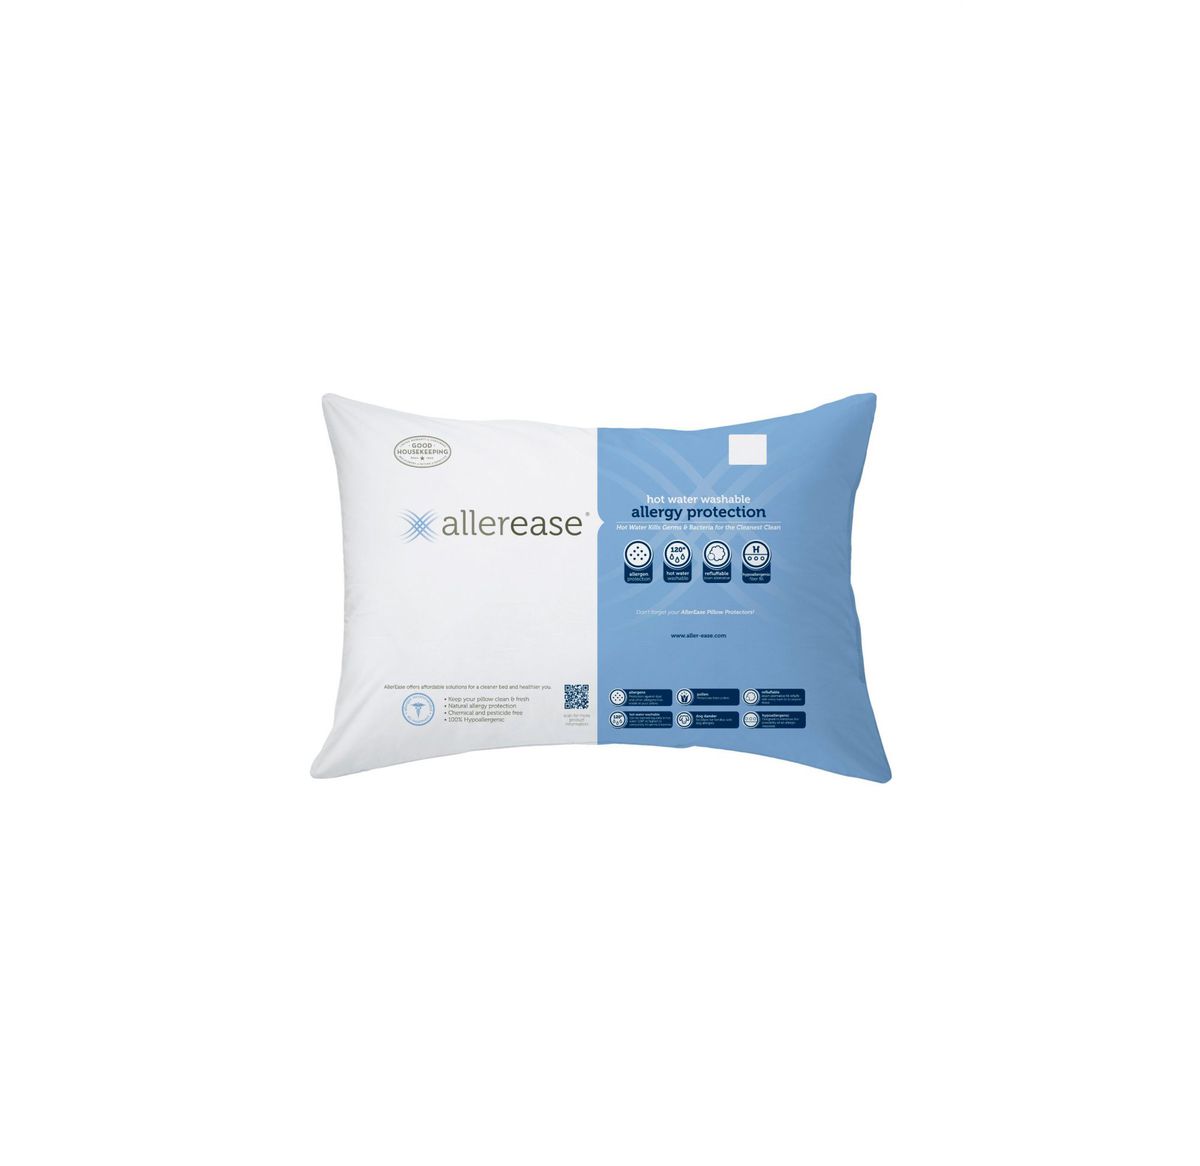 allerease pillow protection